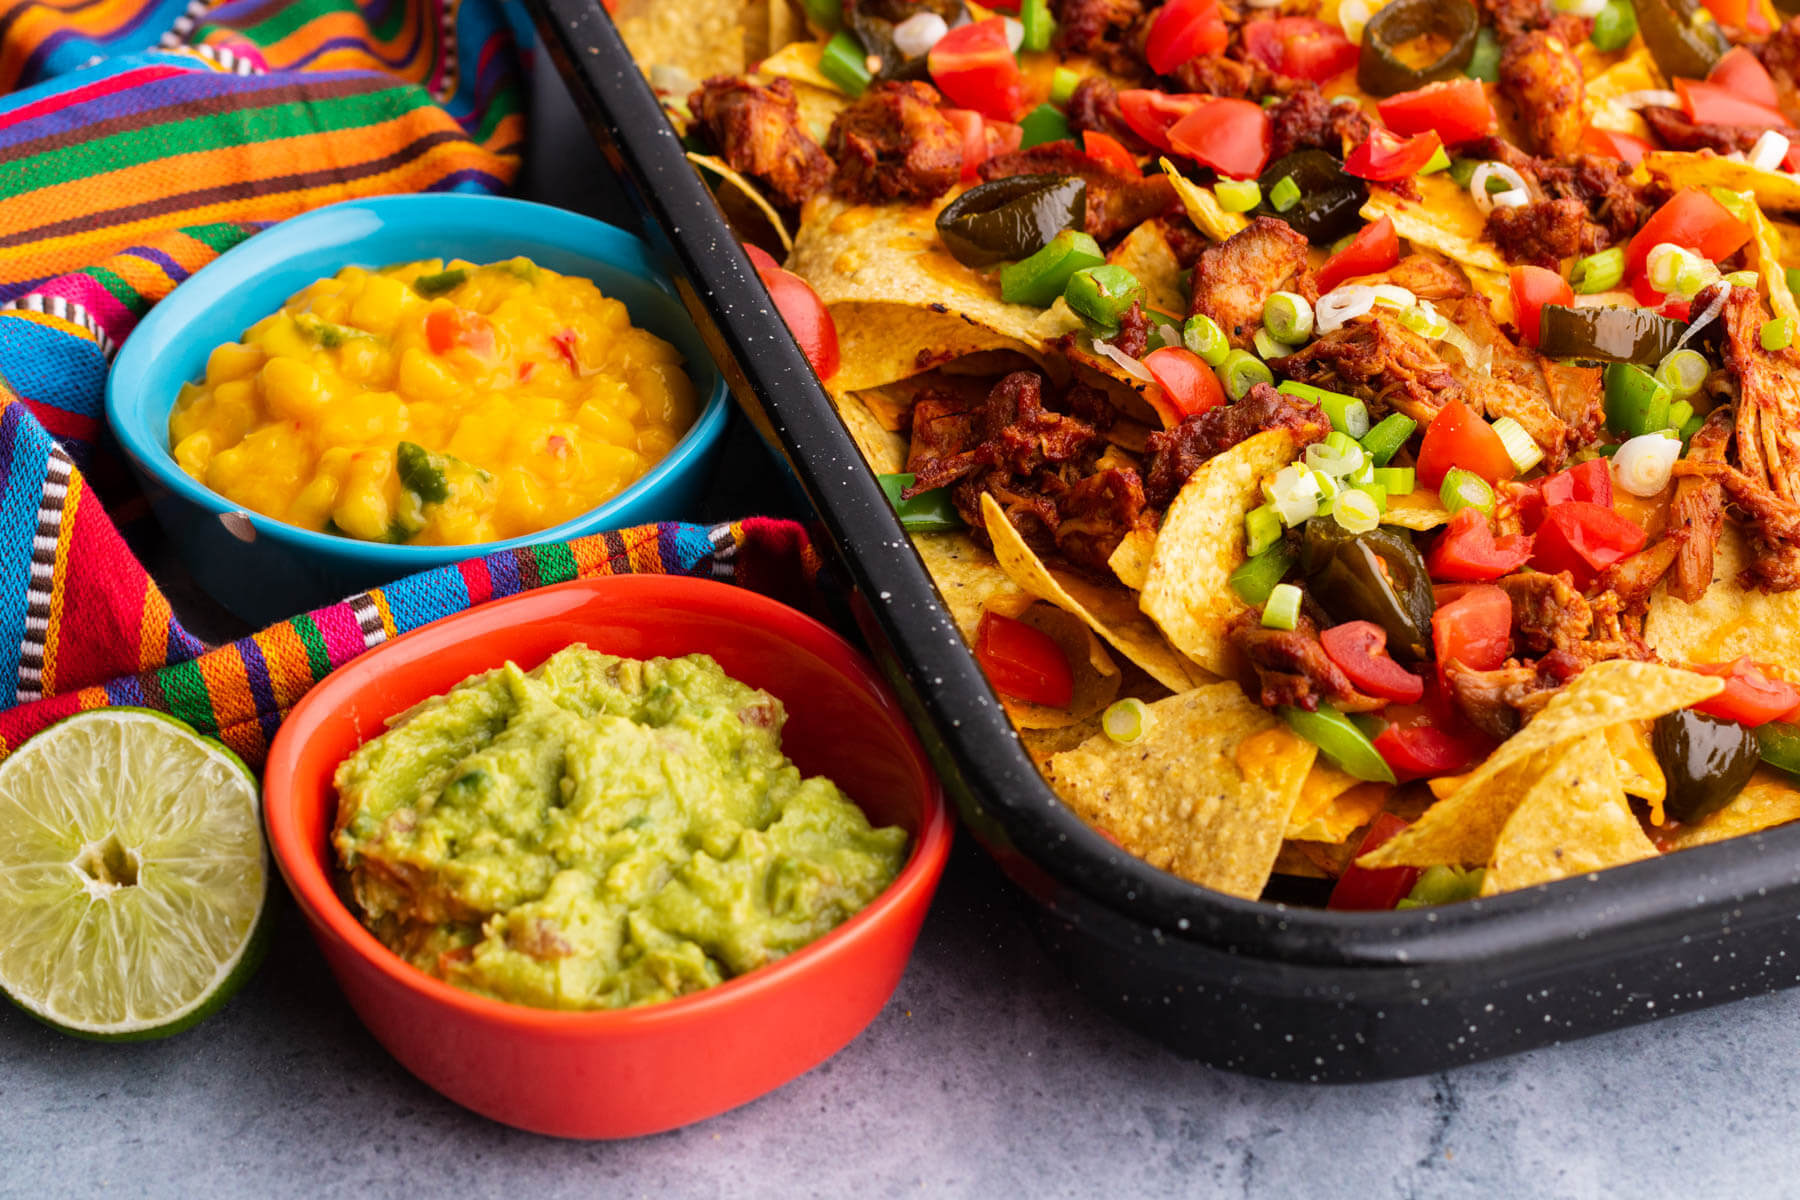 A colourful tray of BBQ Chicken nachos with two small side dishes of mango salsa and guacamole.